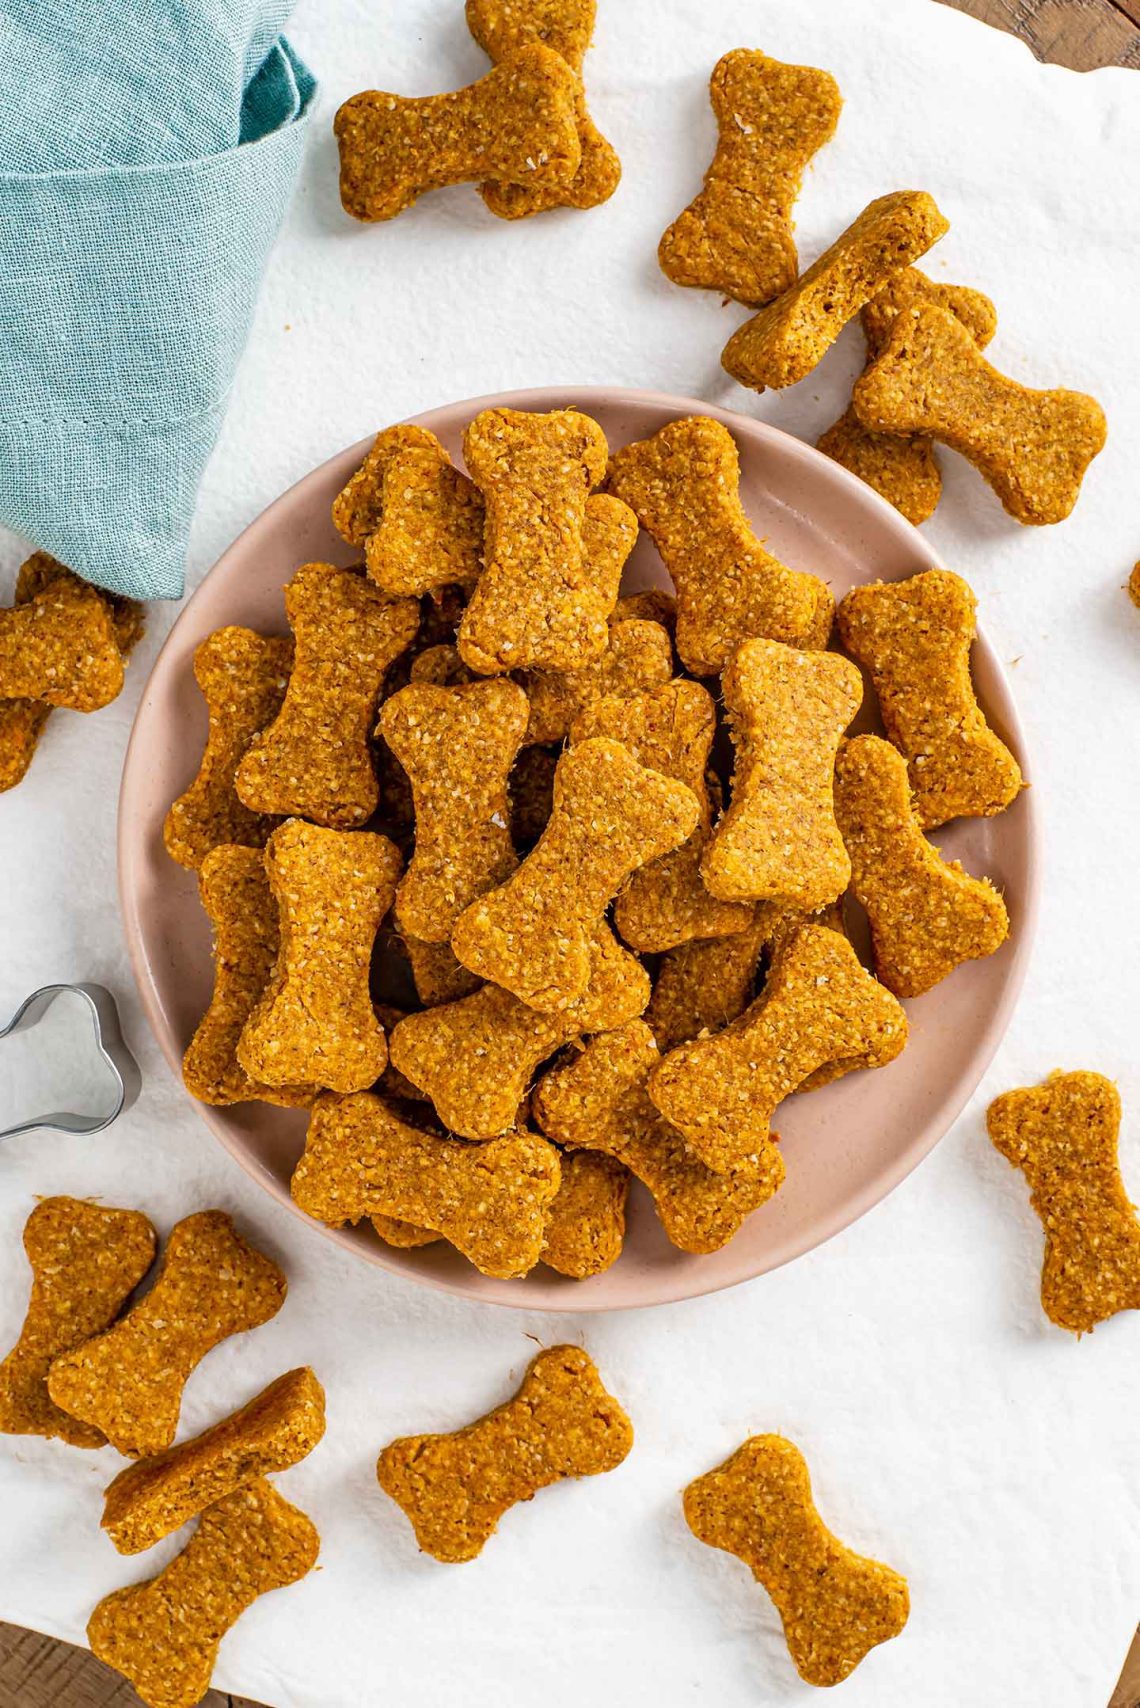 Treats for dogs: what and when to treat